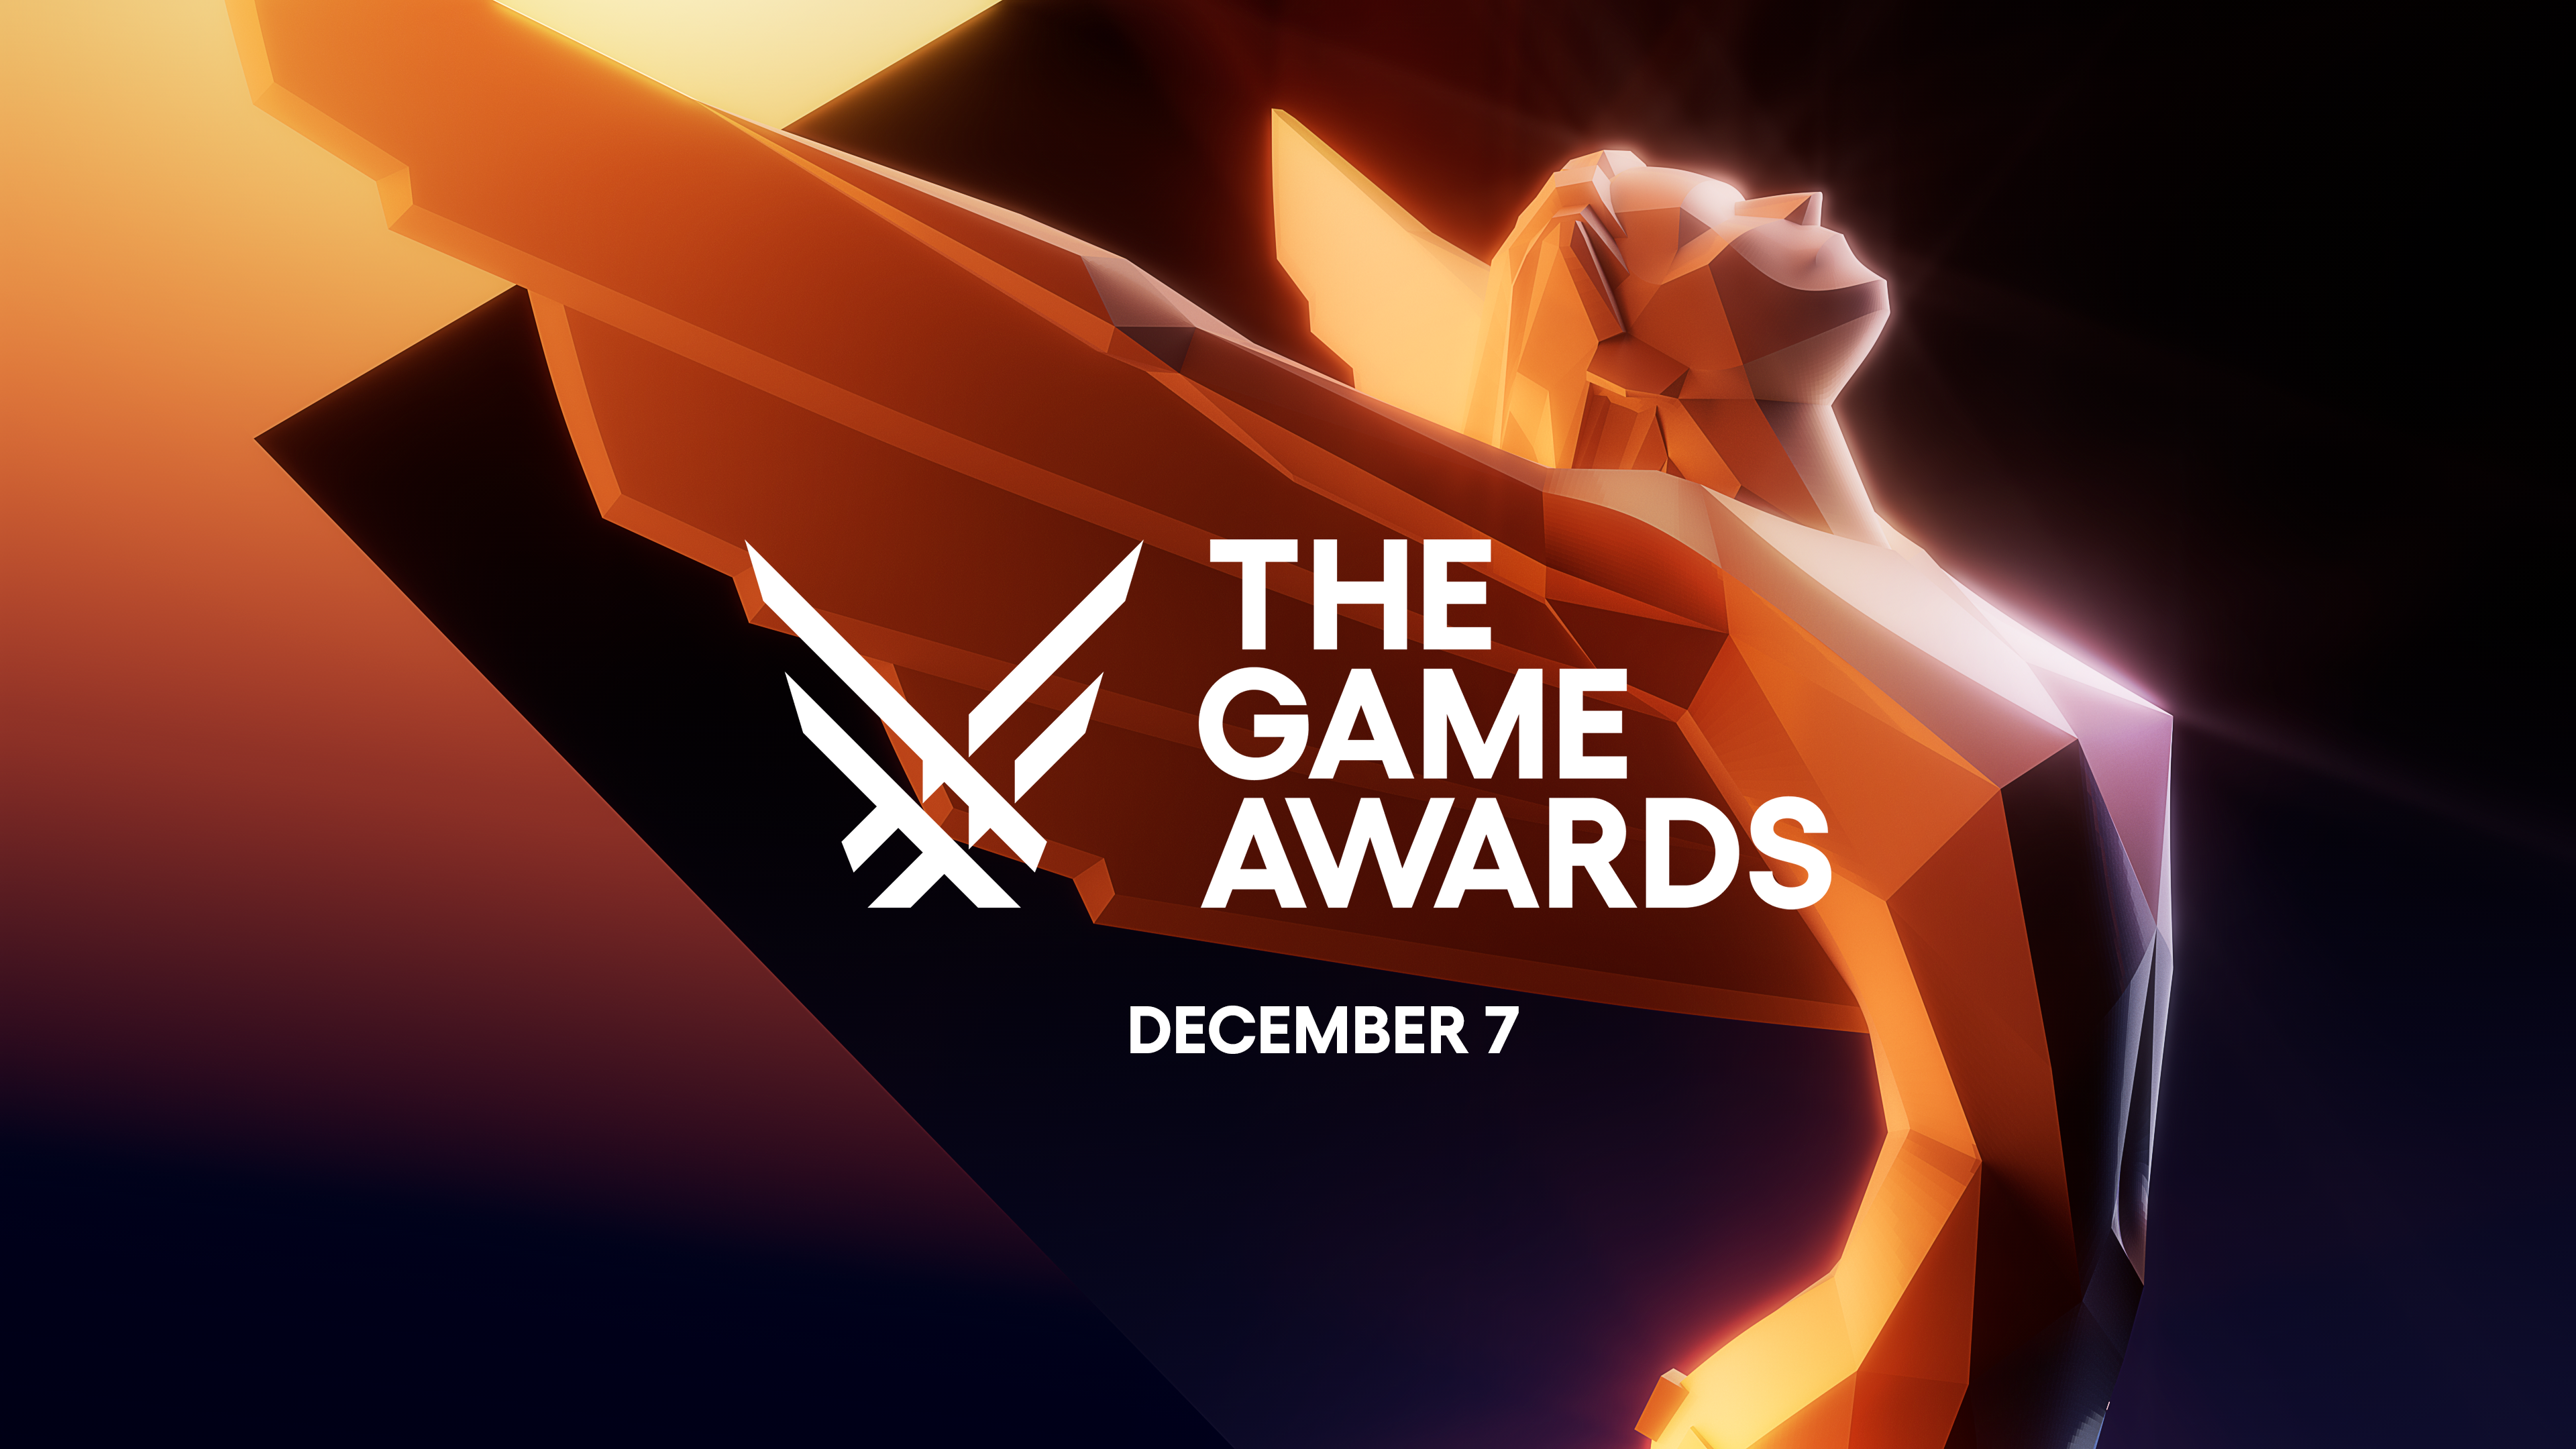 Best Audio Design 2023, who wins the award at the Game Awards?